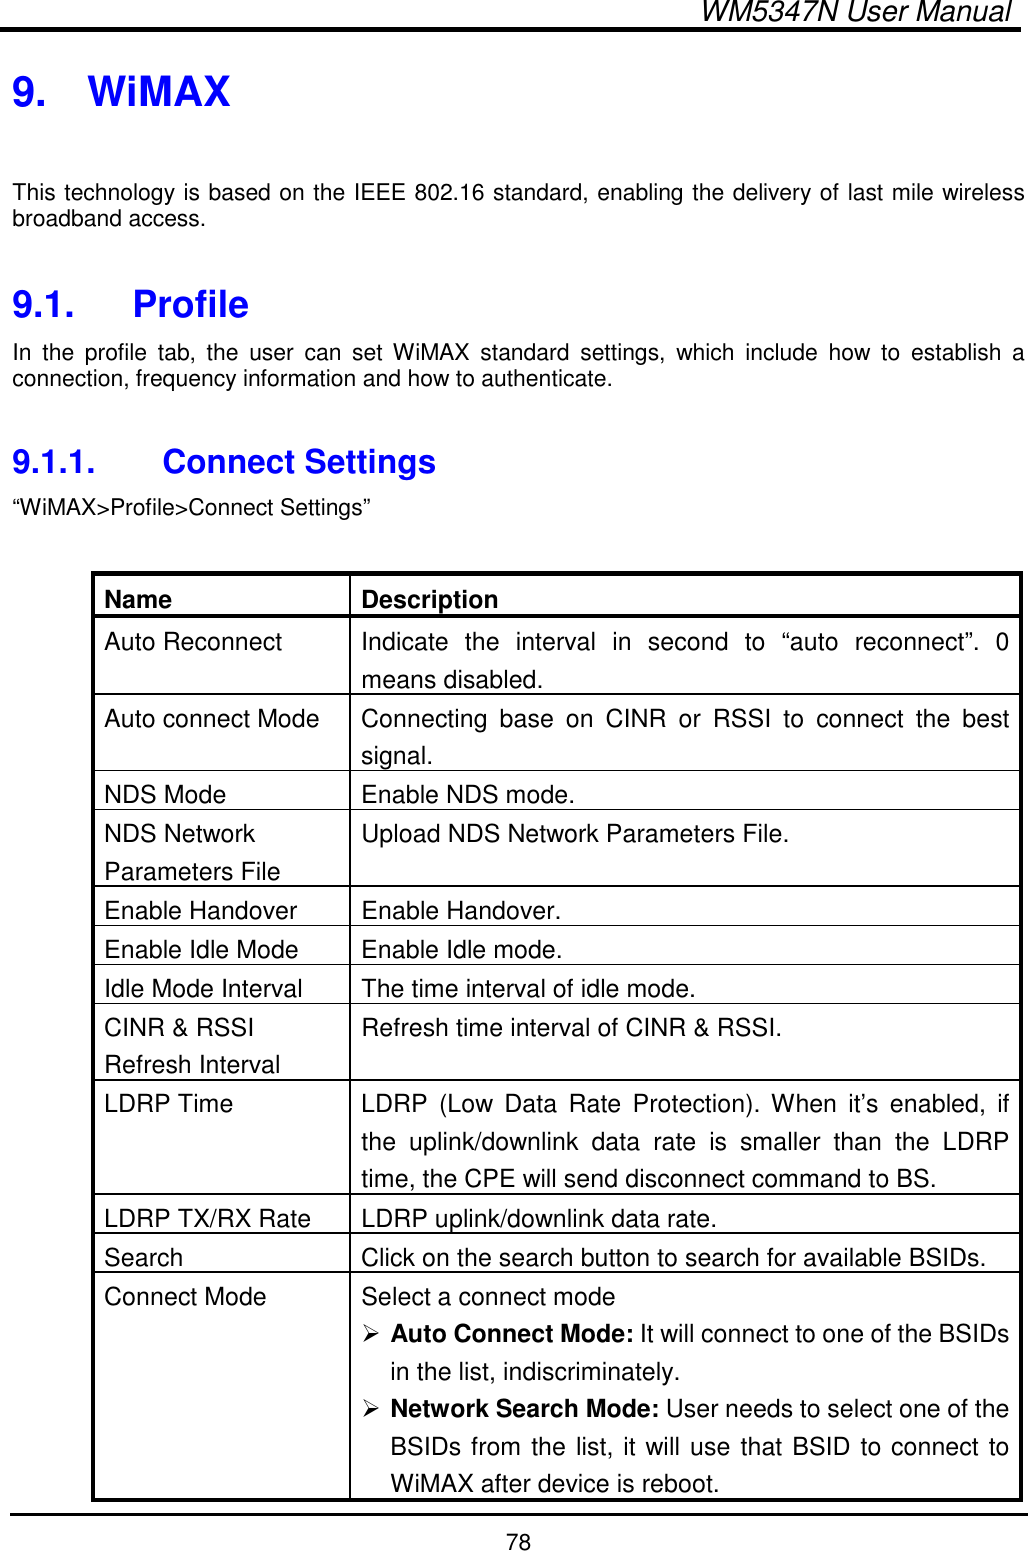  WM5347N User Manual  78 9.  WiMAX  This technology is based on the IEEE 802.16 standard, enabling the delivery of last mile wireless broadband access.  9.1.  Profile In  the  profile  tab,  the  user  can  set  WiMAX  standard  settings,  which  include  how  to  establish  a connection, frequency information and how to authenticate.  9.1.1.  Connect Settings “WiMAX&gt;Profile&gt;Connect Settings”  Name  Description Auto Reconnect  Indicate  the  interval  in  second  to  “auto  reconnect”.  0 means disabled. Auto connect Mode  Connecting  base  on  CINR  or  RSSI  to  connect  the  best signal. NDS Mode  Enable NDS mode. NDS Network Parameters File Upload NDS Network Parameters File. Enable Handover  Enable Handover. Enable Idle Mode  Enable Idle mode. Idle Mode Interval  The time interval of idle mode. CINR &amp; RSSI Refresh Interval Refresh time interval of CINR &amp; RSSI. LDRP Time  LDRP  (Low  Data  Rate  Protection). When  it’s  enabled,  if the  uplink/downlink  data  rate  is  smaller  than  the  LDRP time, the CPE will send disconnect command to BS. LDRP TX/RX Rate  LDRP uplink/downlink data rate. Search  Click on the search button to search for available BSIDs. Connect Mode  Select a connect mode  Auto Connect Mode: It will connect to one of the BSIDs in the list, indiscriminately.  Network Search Mode: User needs to select one of the BSIDs from the list, it will use that BSID to connect to WiMAX after device is reboot. 